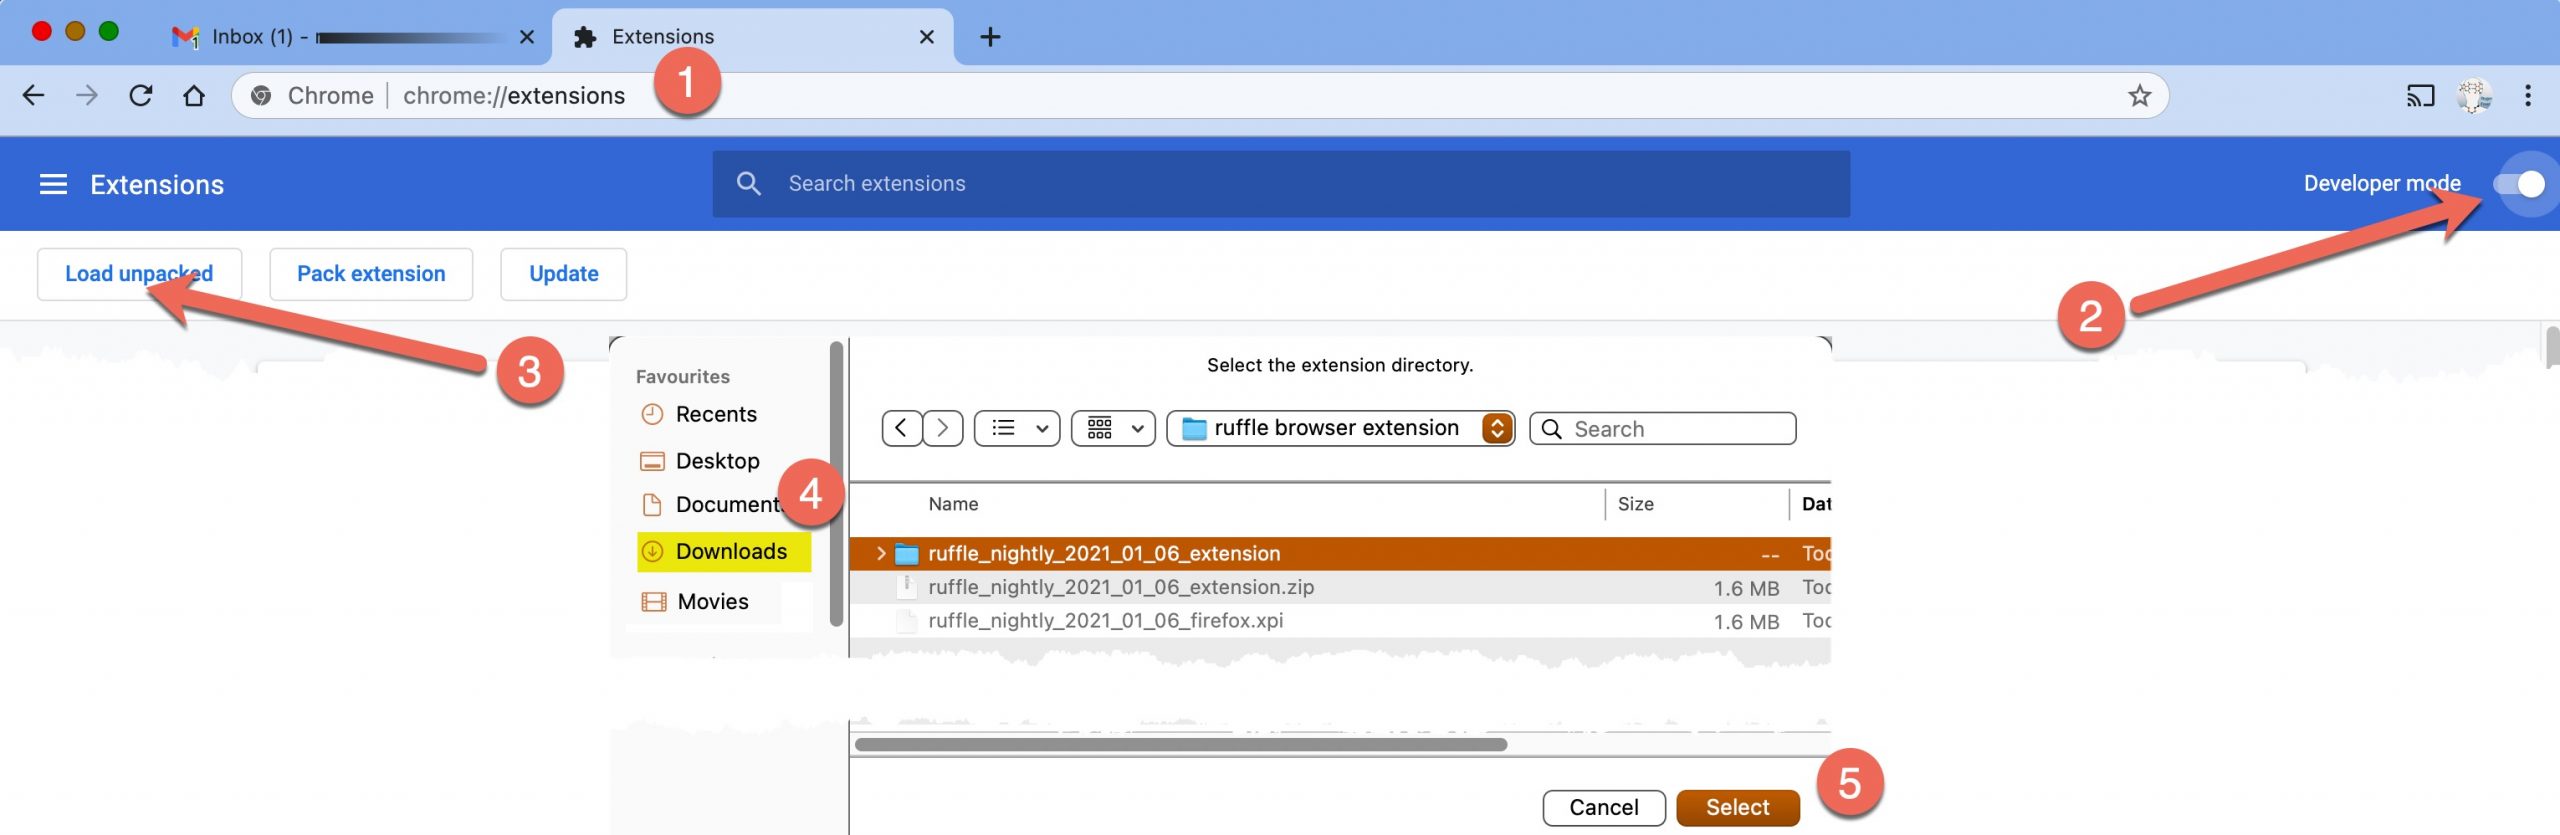 How to install Chrome extensions on Firefox browser